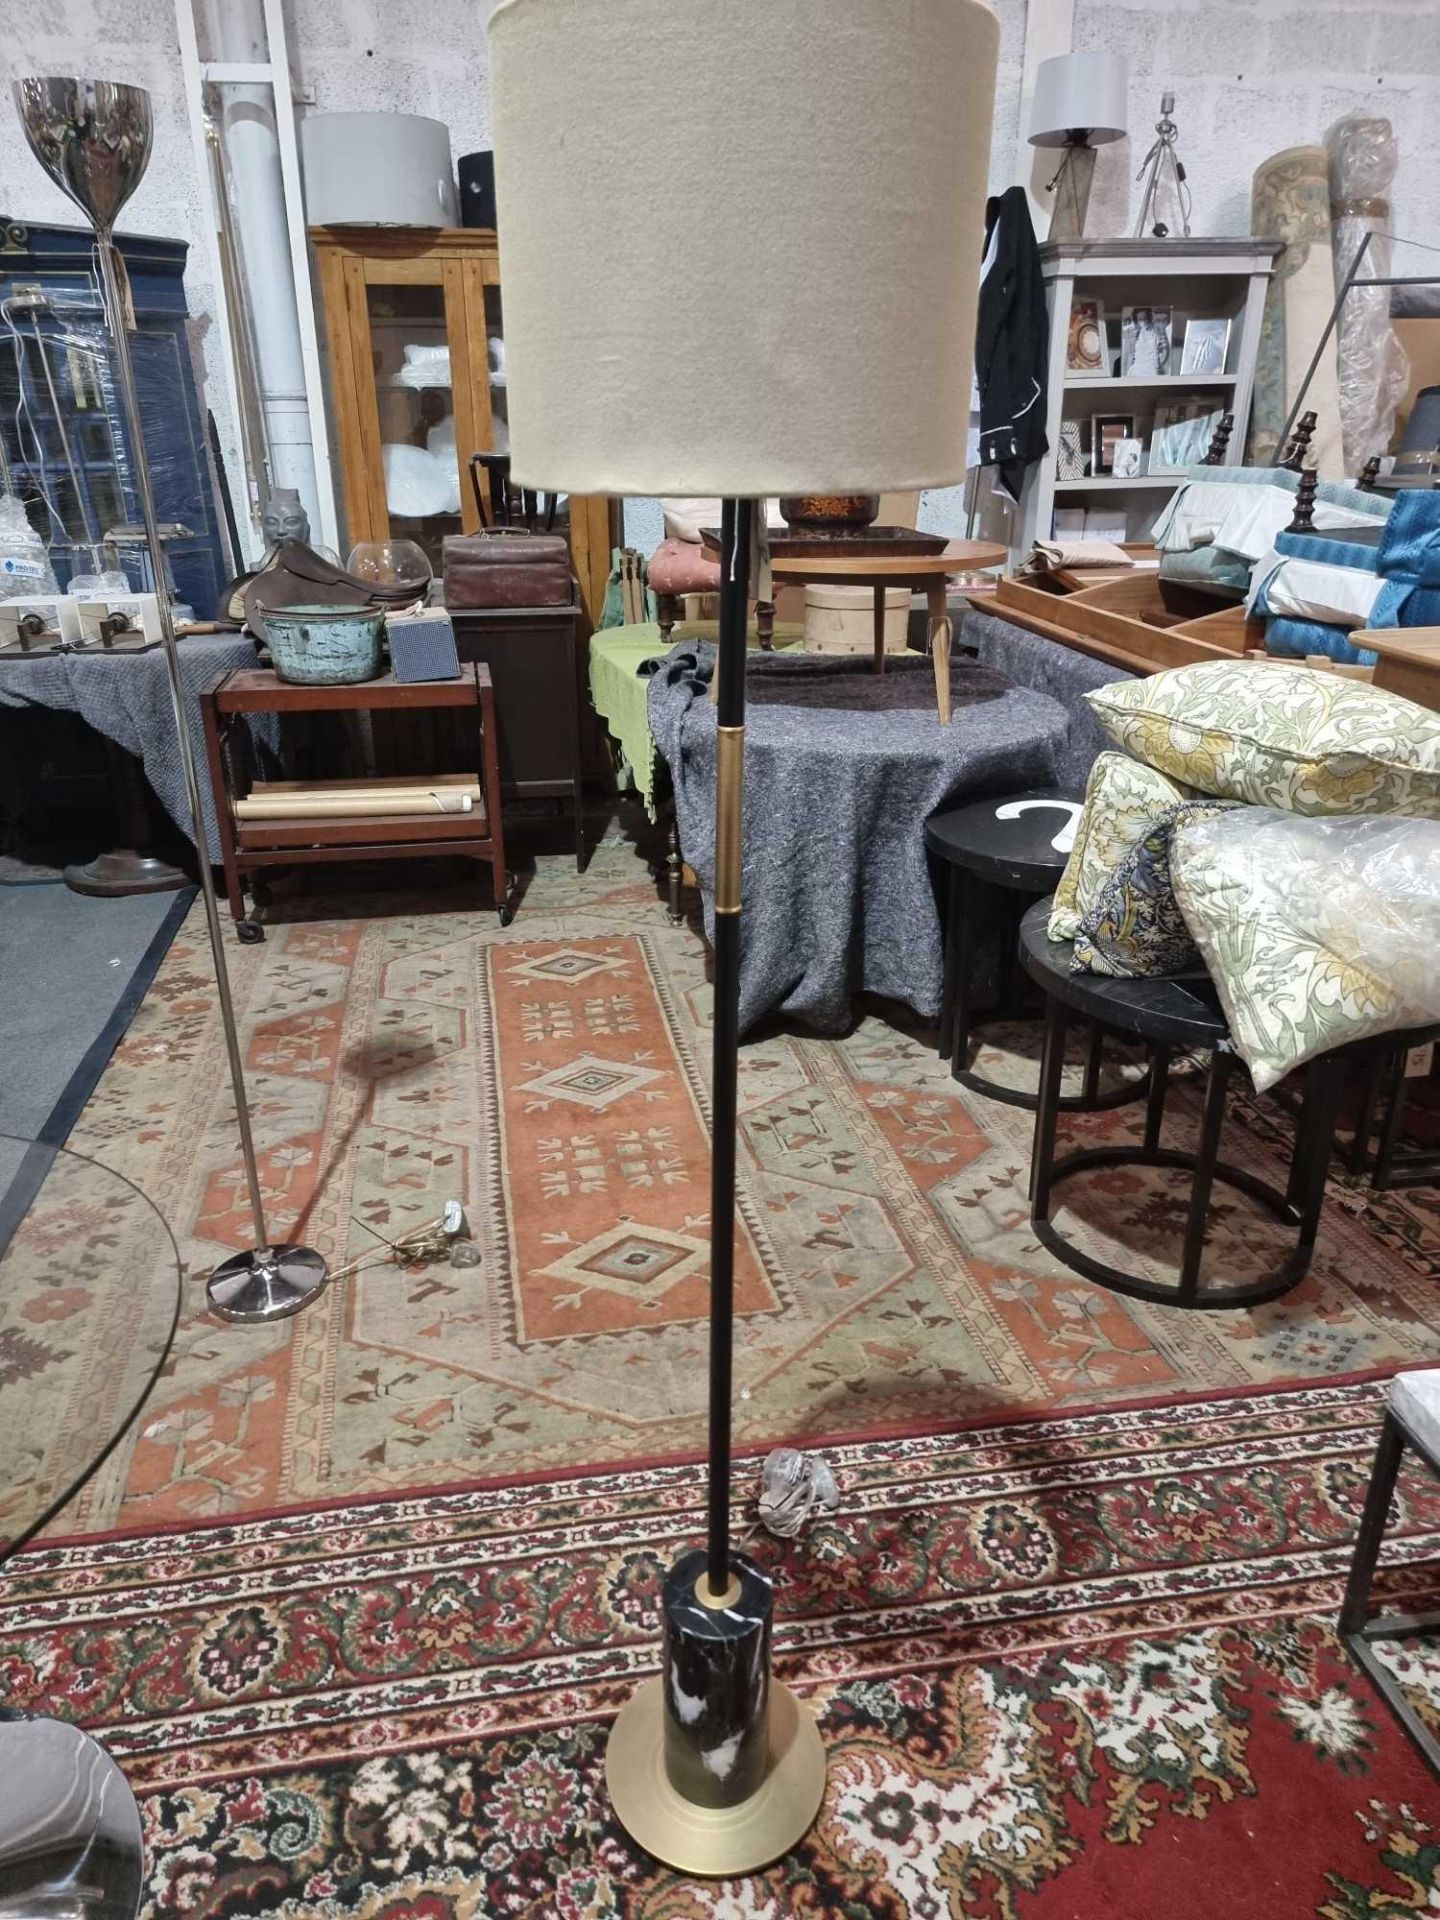 R V Astley Alix Floor Lamp - Antique Brass And Black Marble, Black And Antique Brass Floor Lamp W - Image 2 of 5